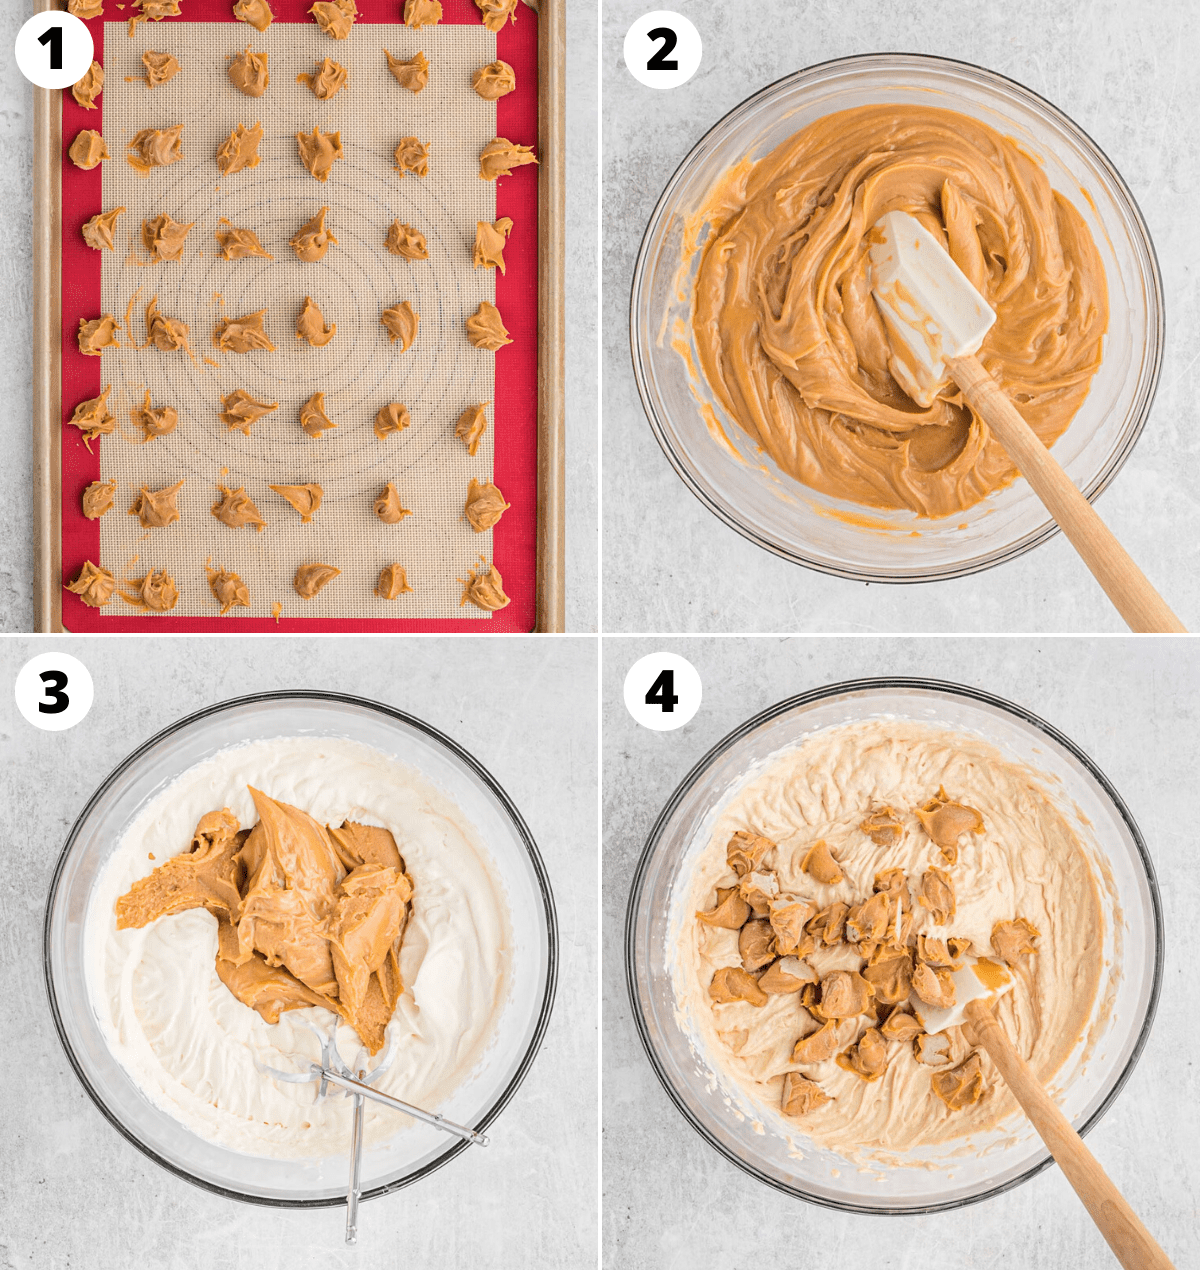 4 photos showing process of making peanut butter ice cream